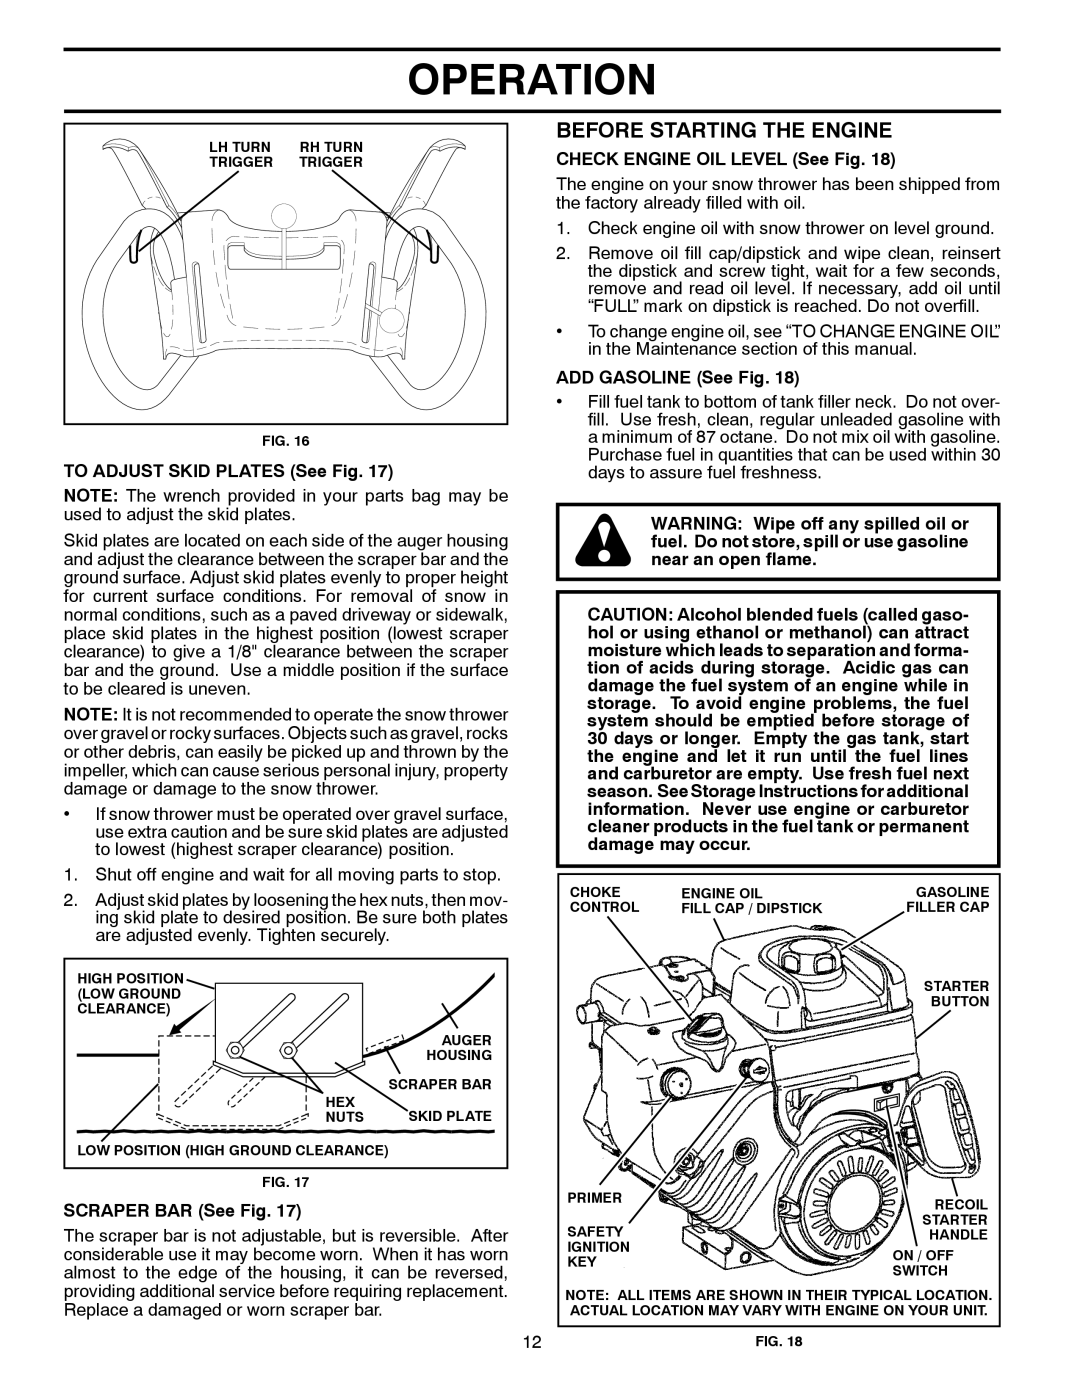 Poulan 437685 Before Starting the Engine, To Adjust Skid Plates See Fig, Scraper BAR See Fig, ADD Gasoline See Fig 